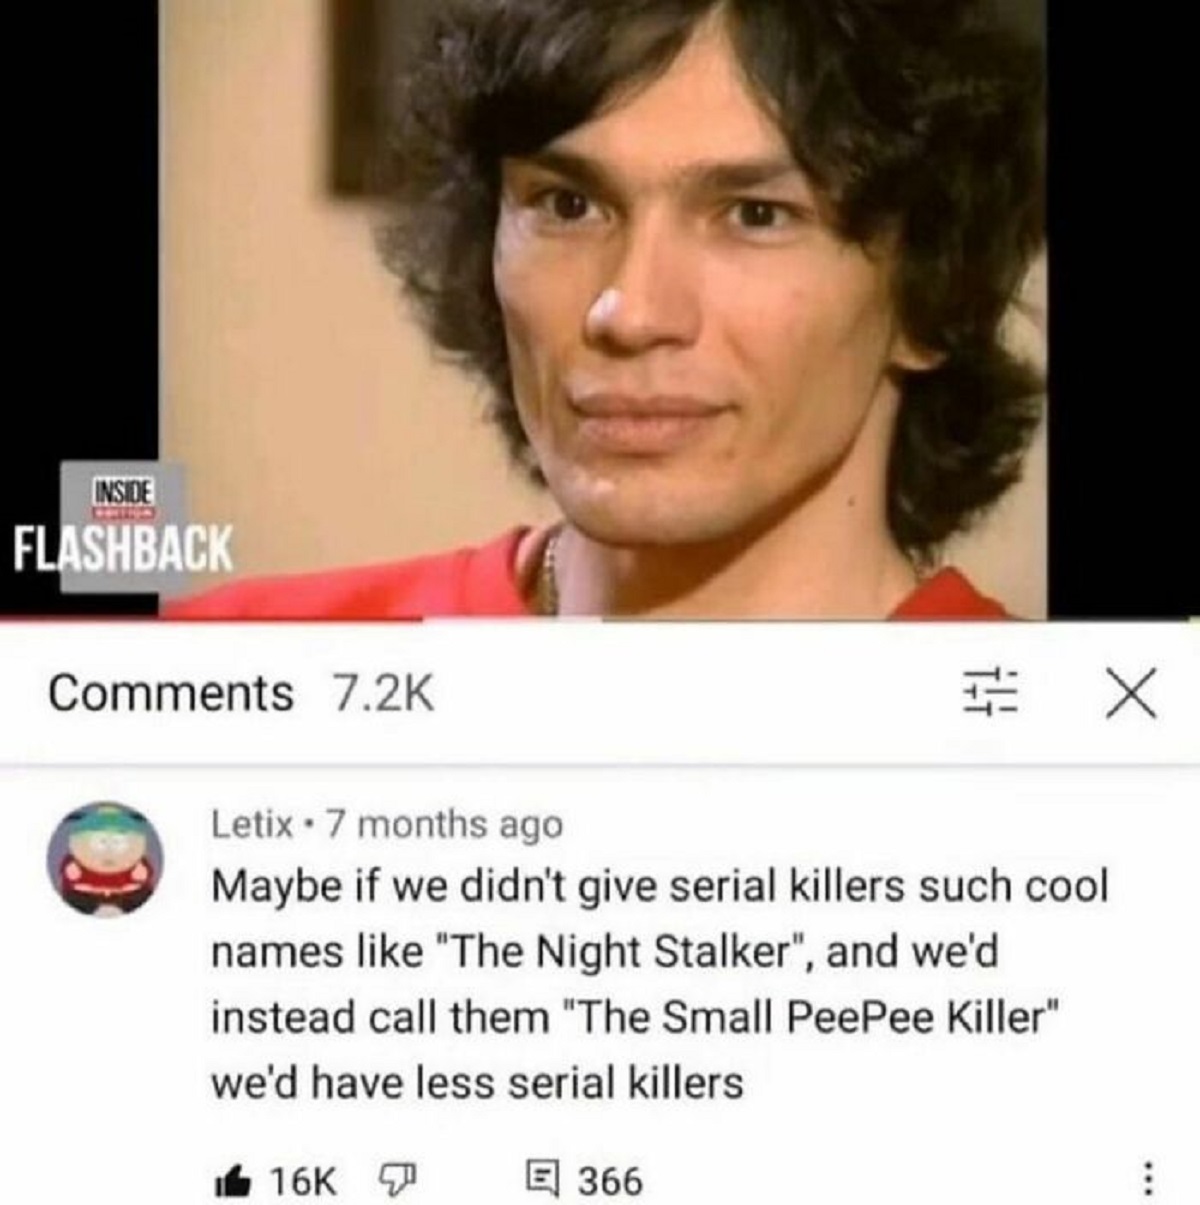 small pp killer - Inside Flashback Letix 7 months ago X Maybe if we didn't give serial killers such cool names "The Night Stalker", and we'd instead call them "The Small PeePee Killer" we'd have less serial killers 16K 366 ...